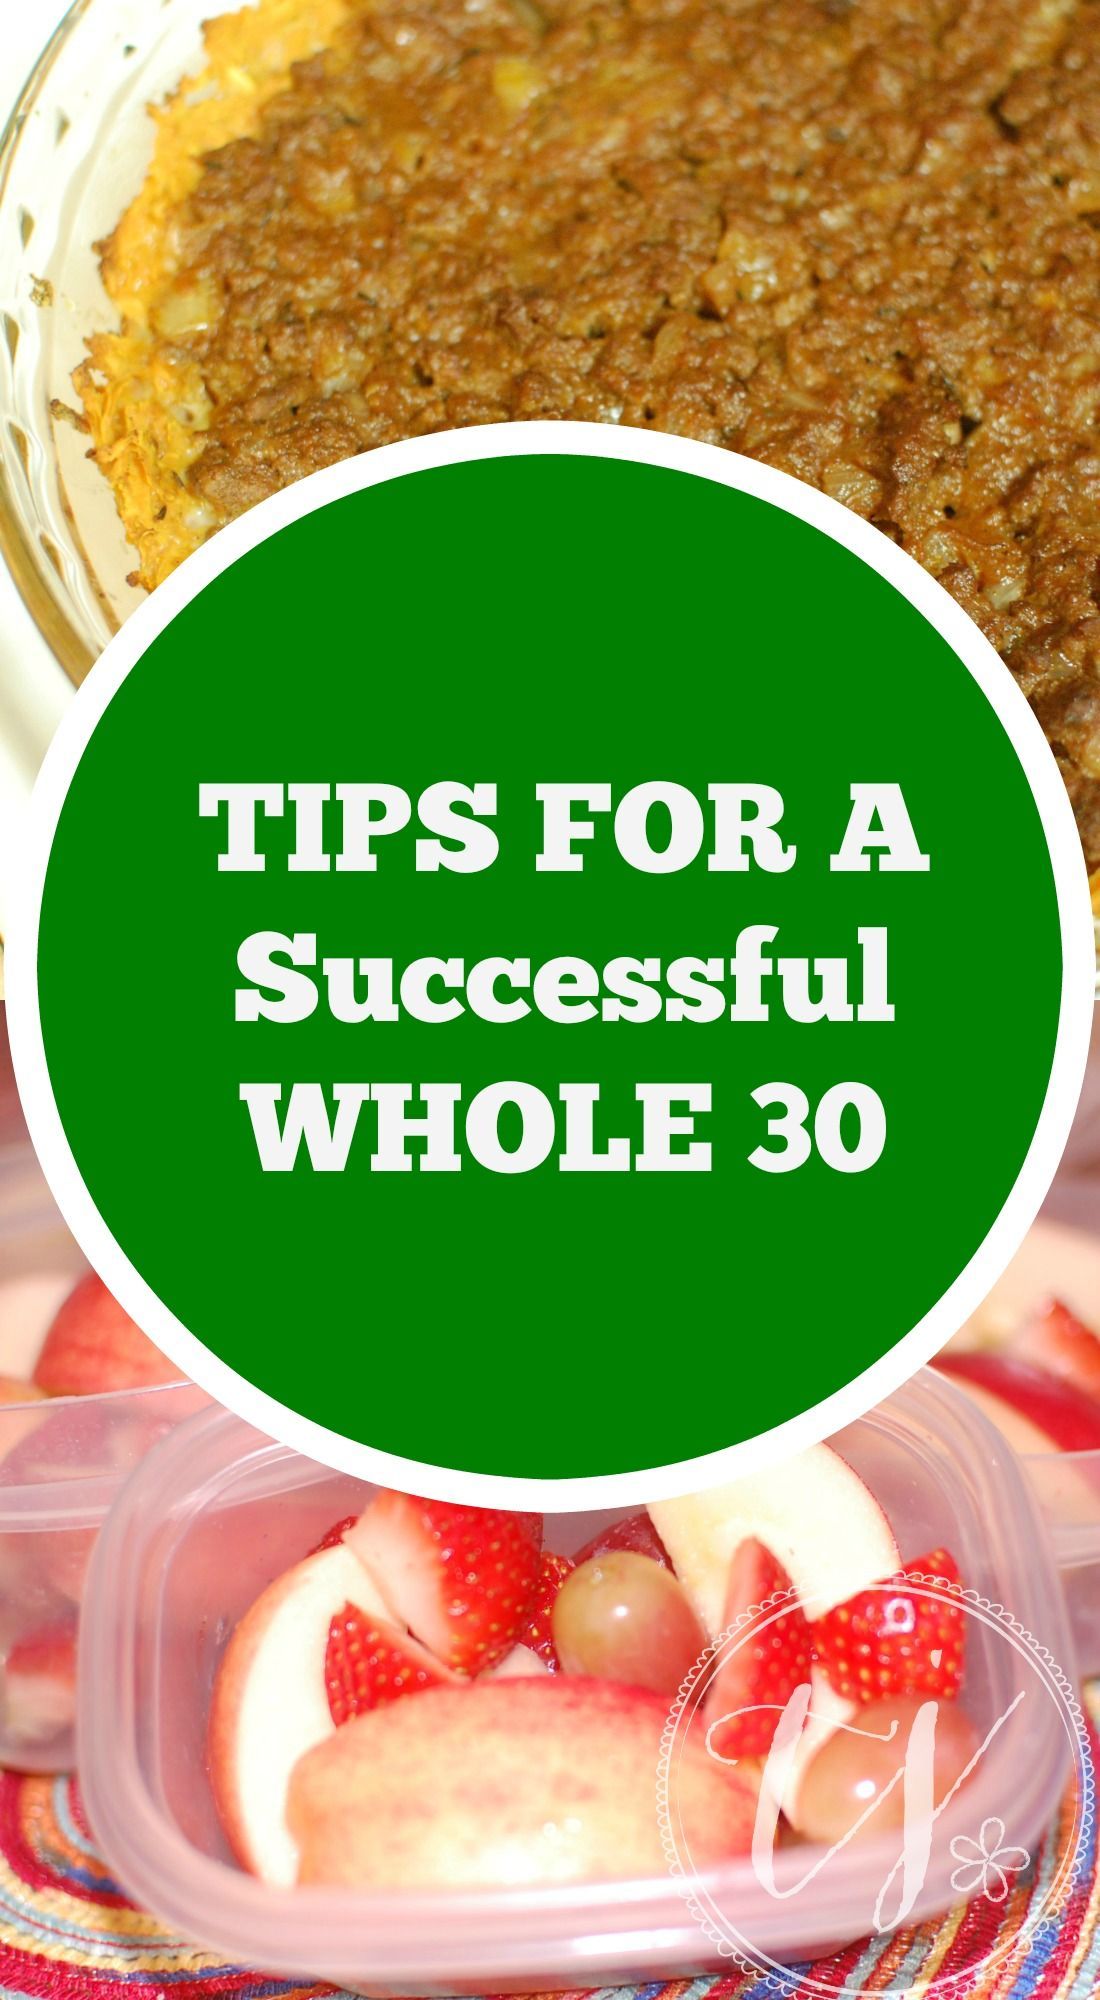 Awesome post to help complete a WHOLE 30! Excited to really see the benefits of this challenge and implement these TIPS! #whole30